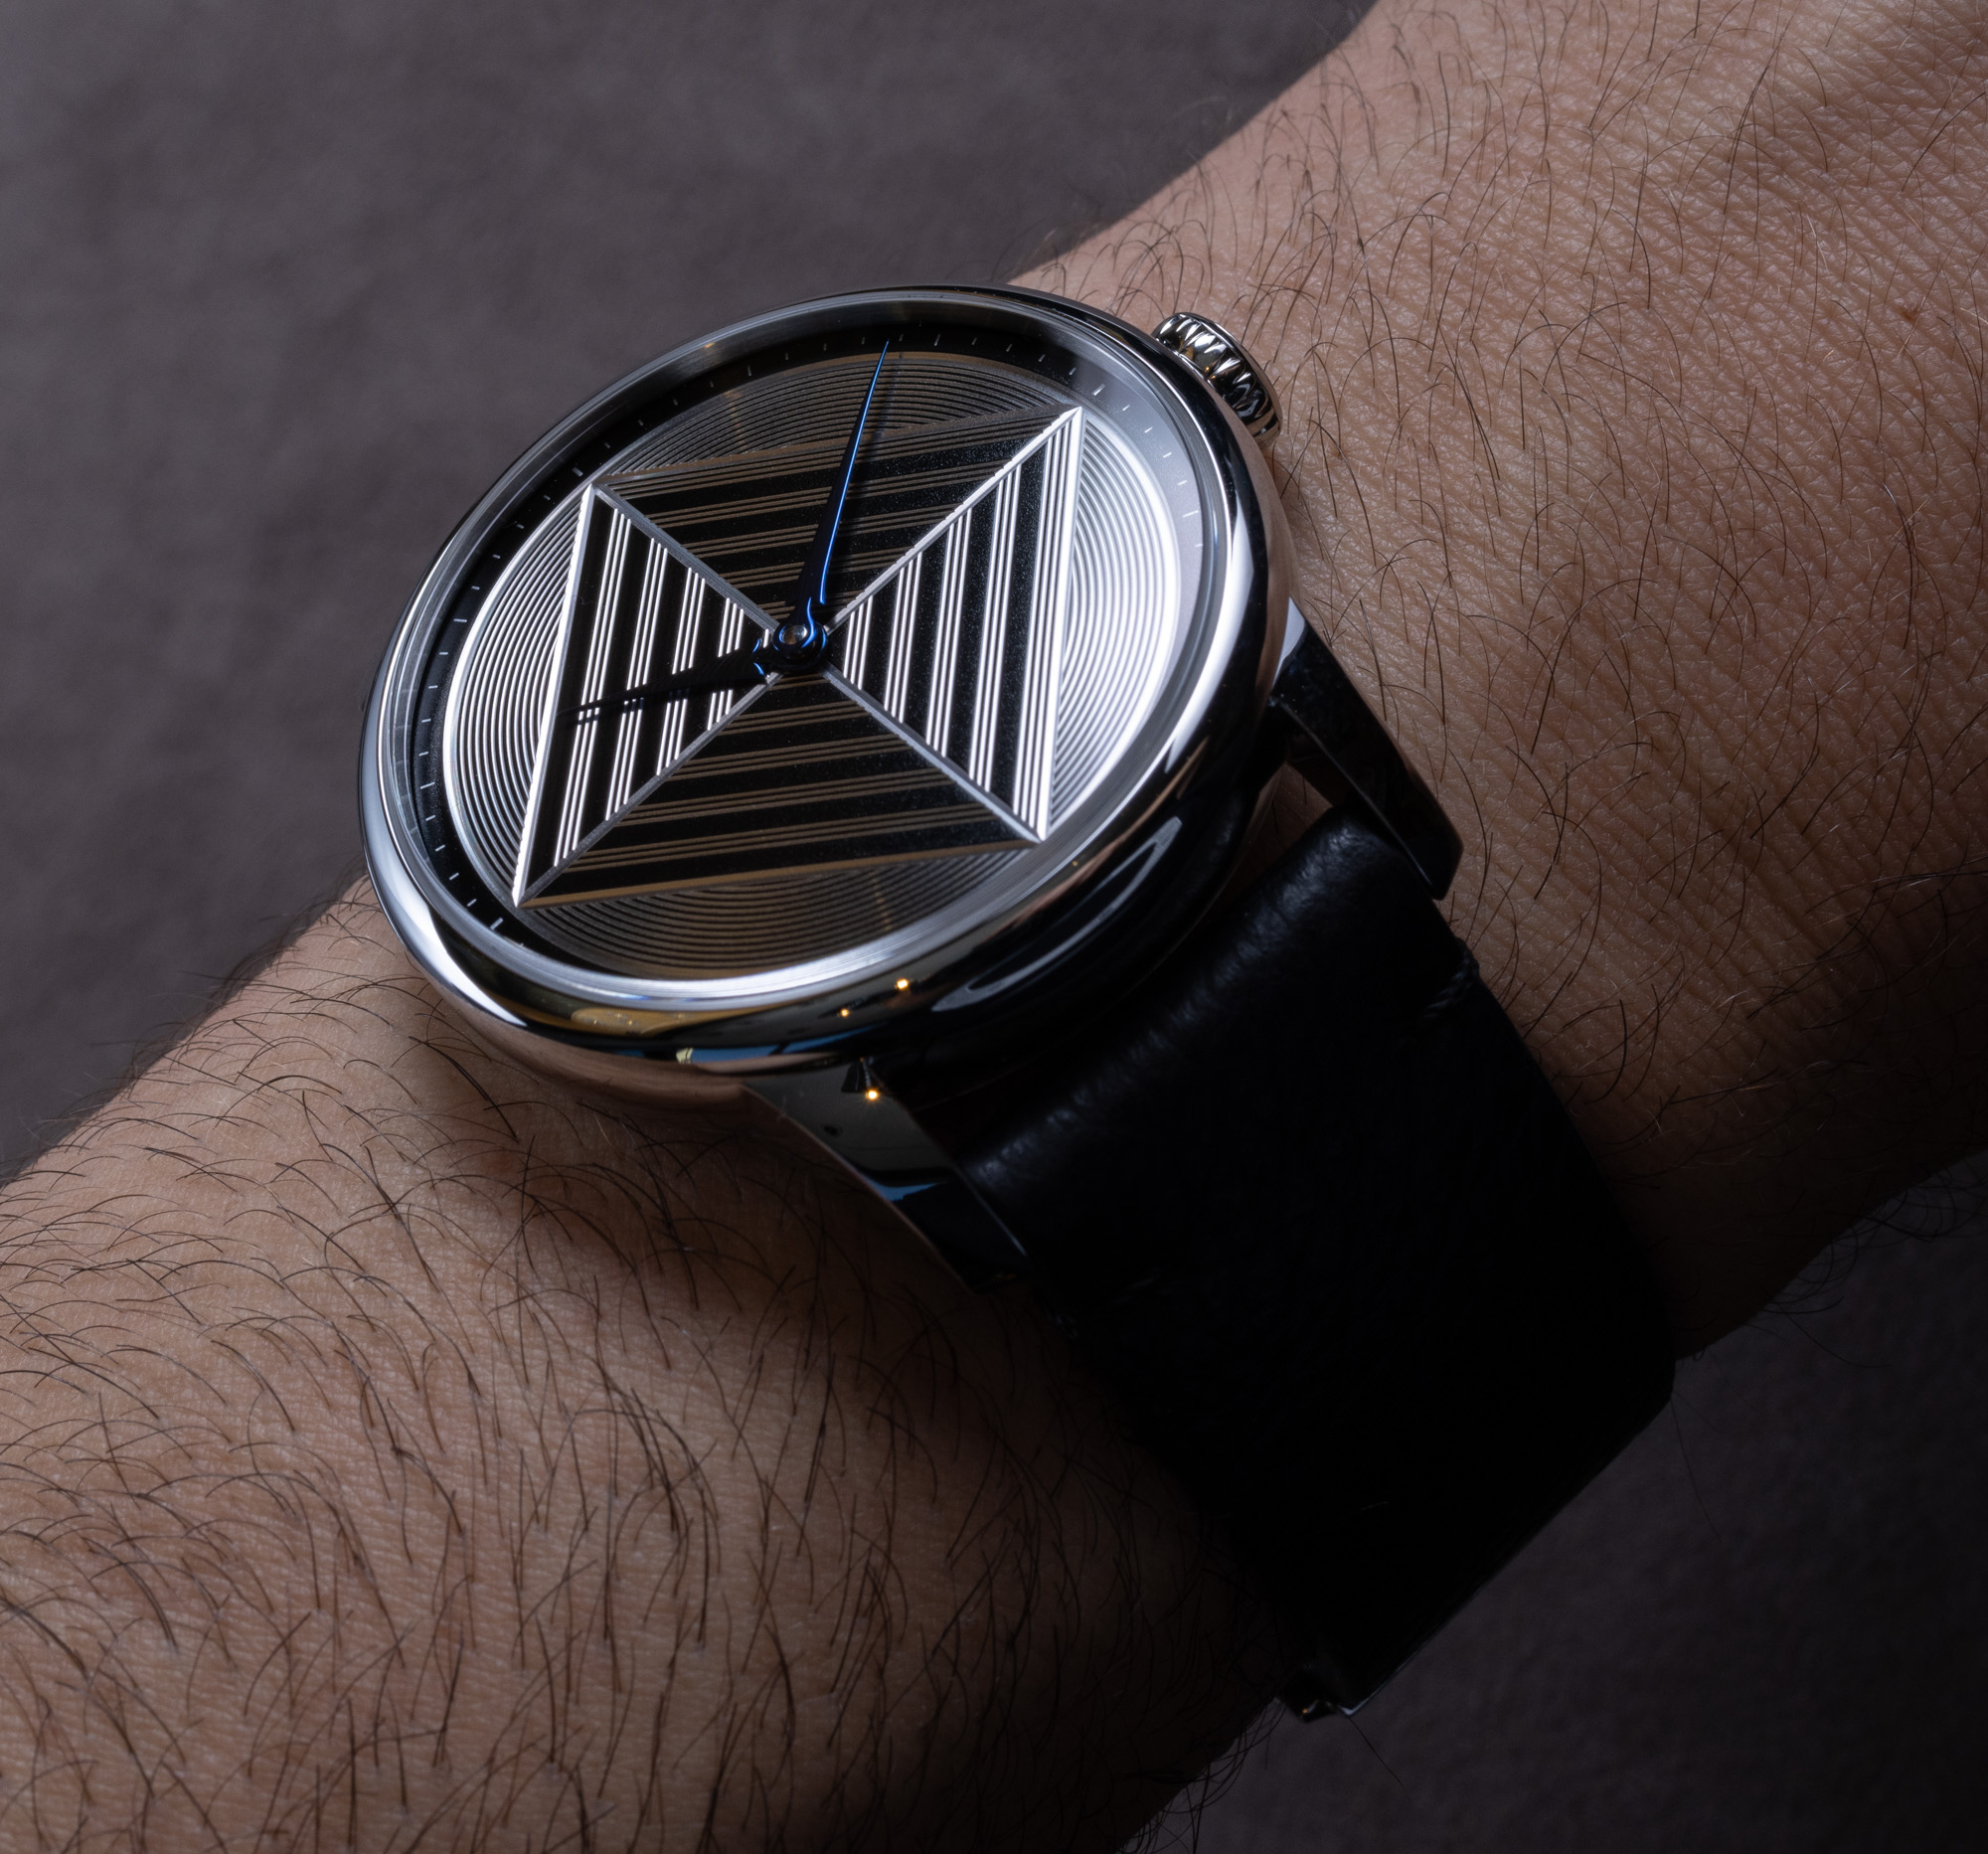 Louis Erard Excellence Guilloche Main II - Hands-On, Price